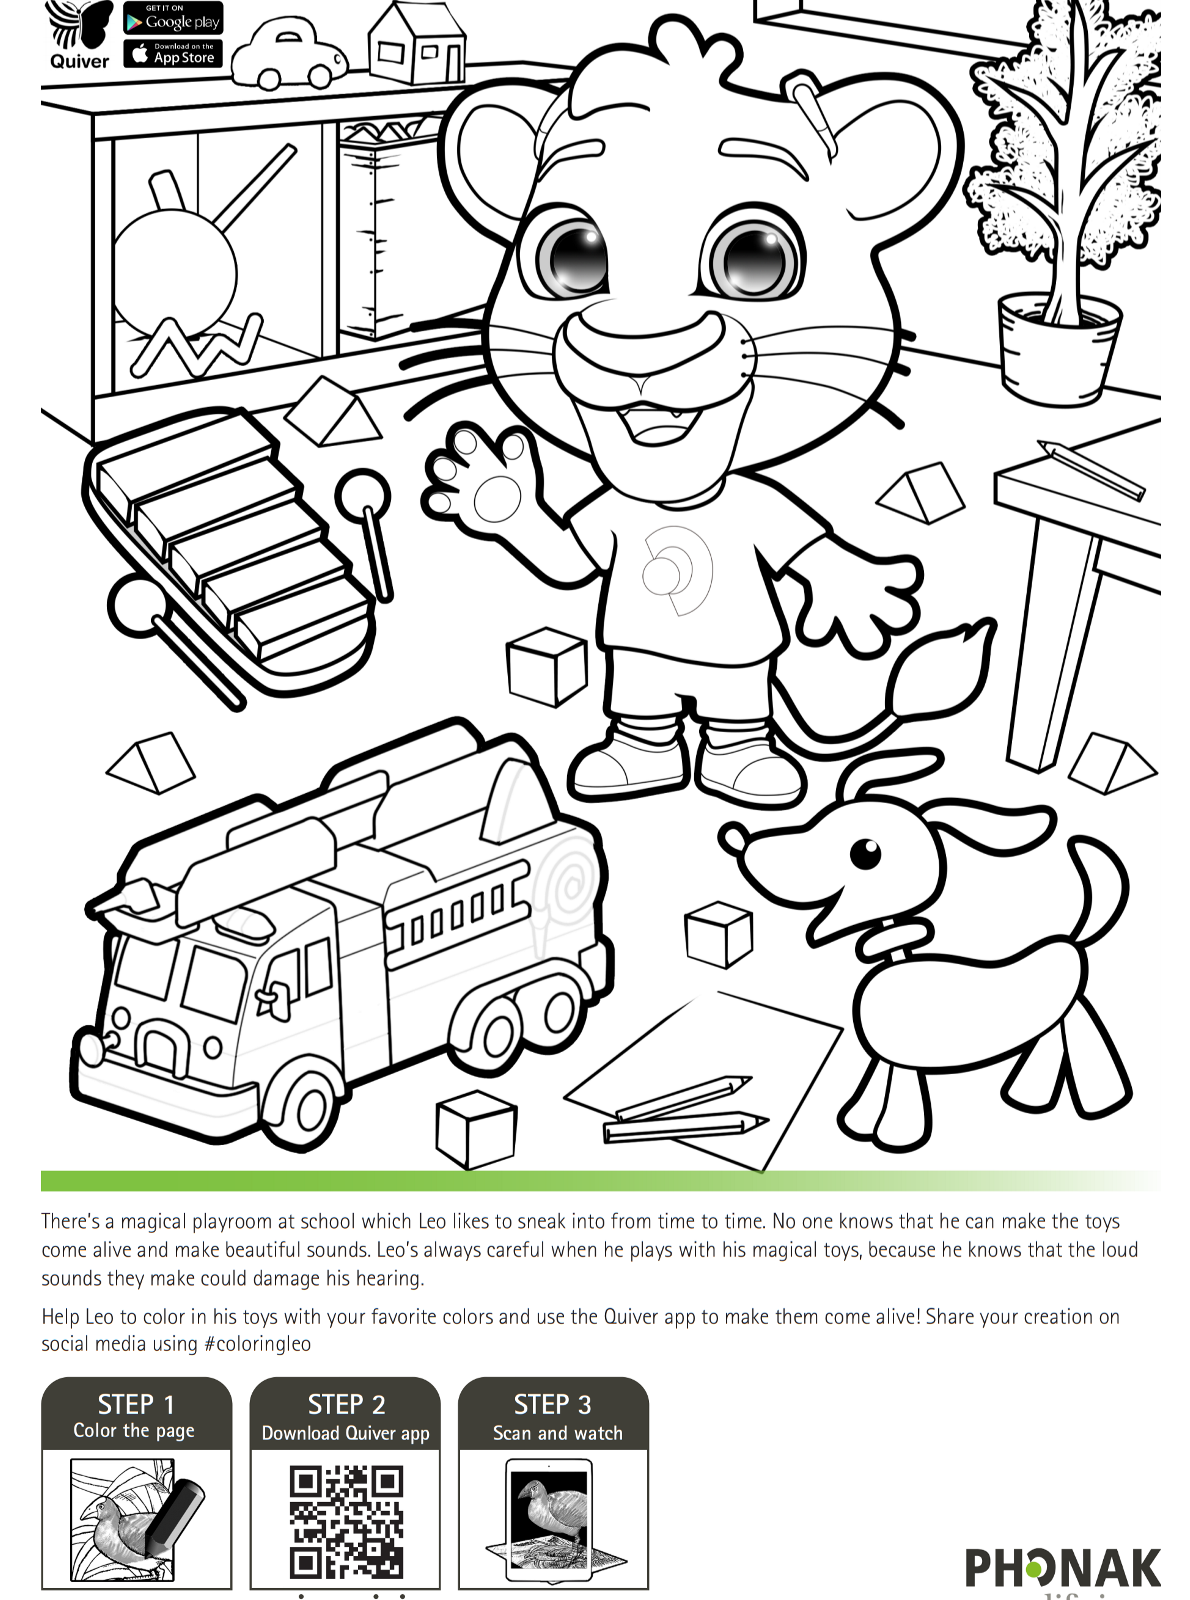 Kids-n-fun.com | Coloring page Quiver toys